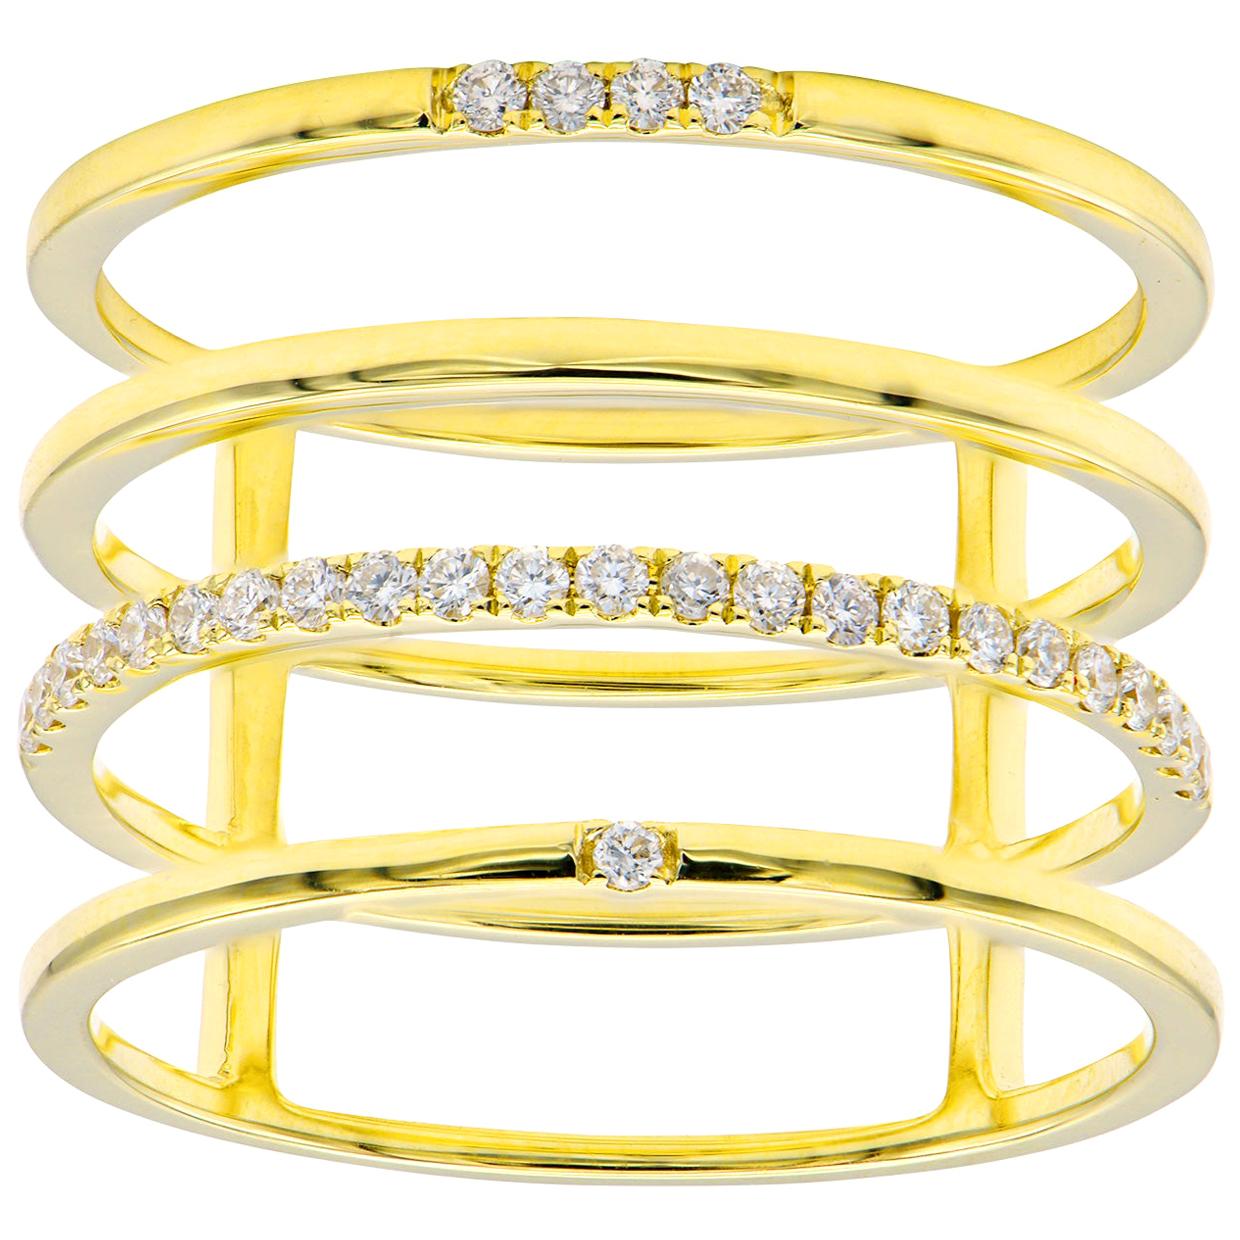 Four-Row with Diamonds Fashion Ring in Yellow Gold